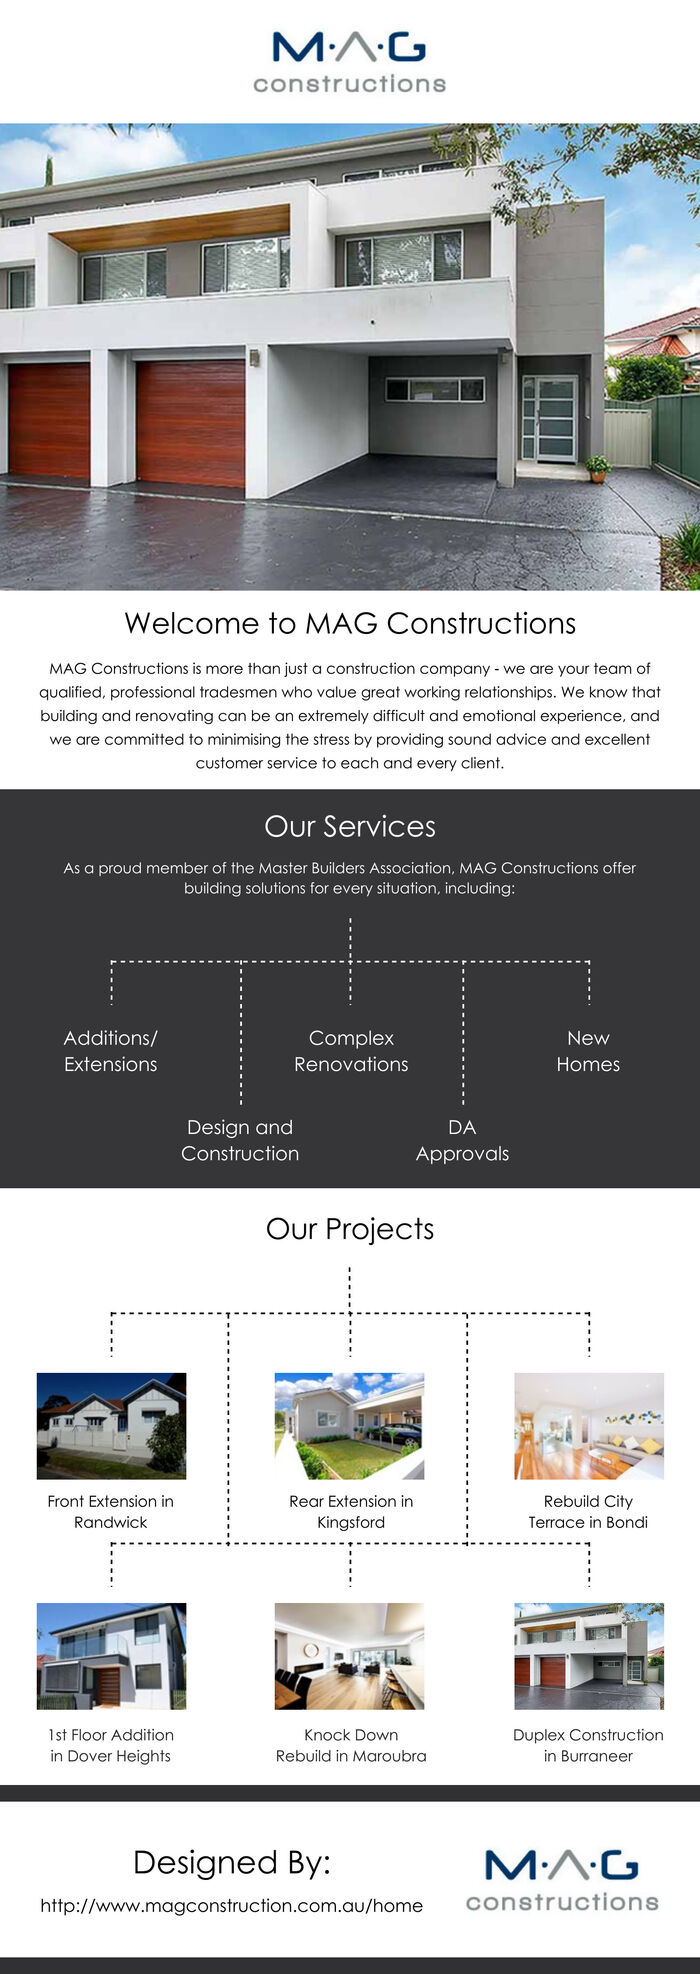 This infographic is designed by MAG Construction